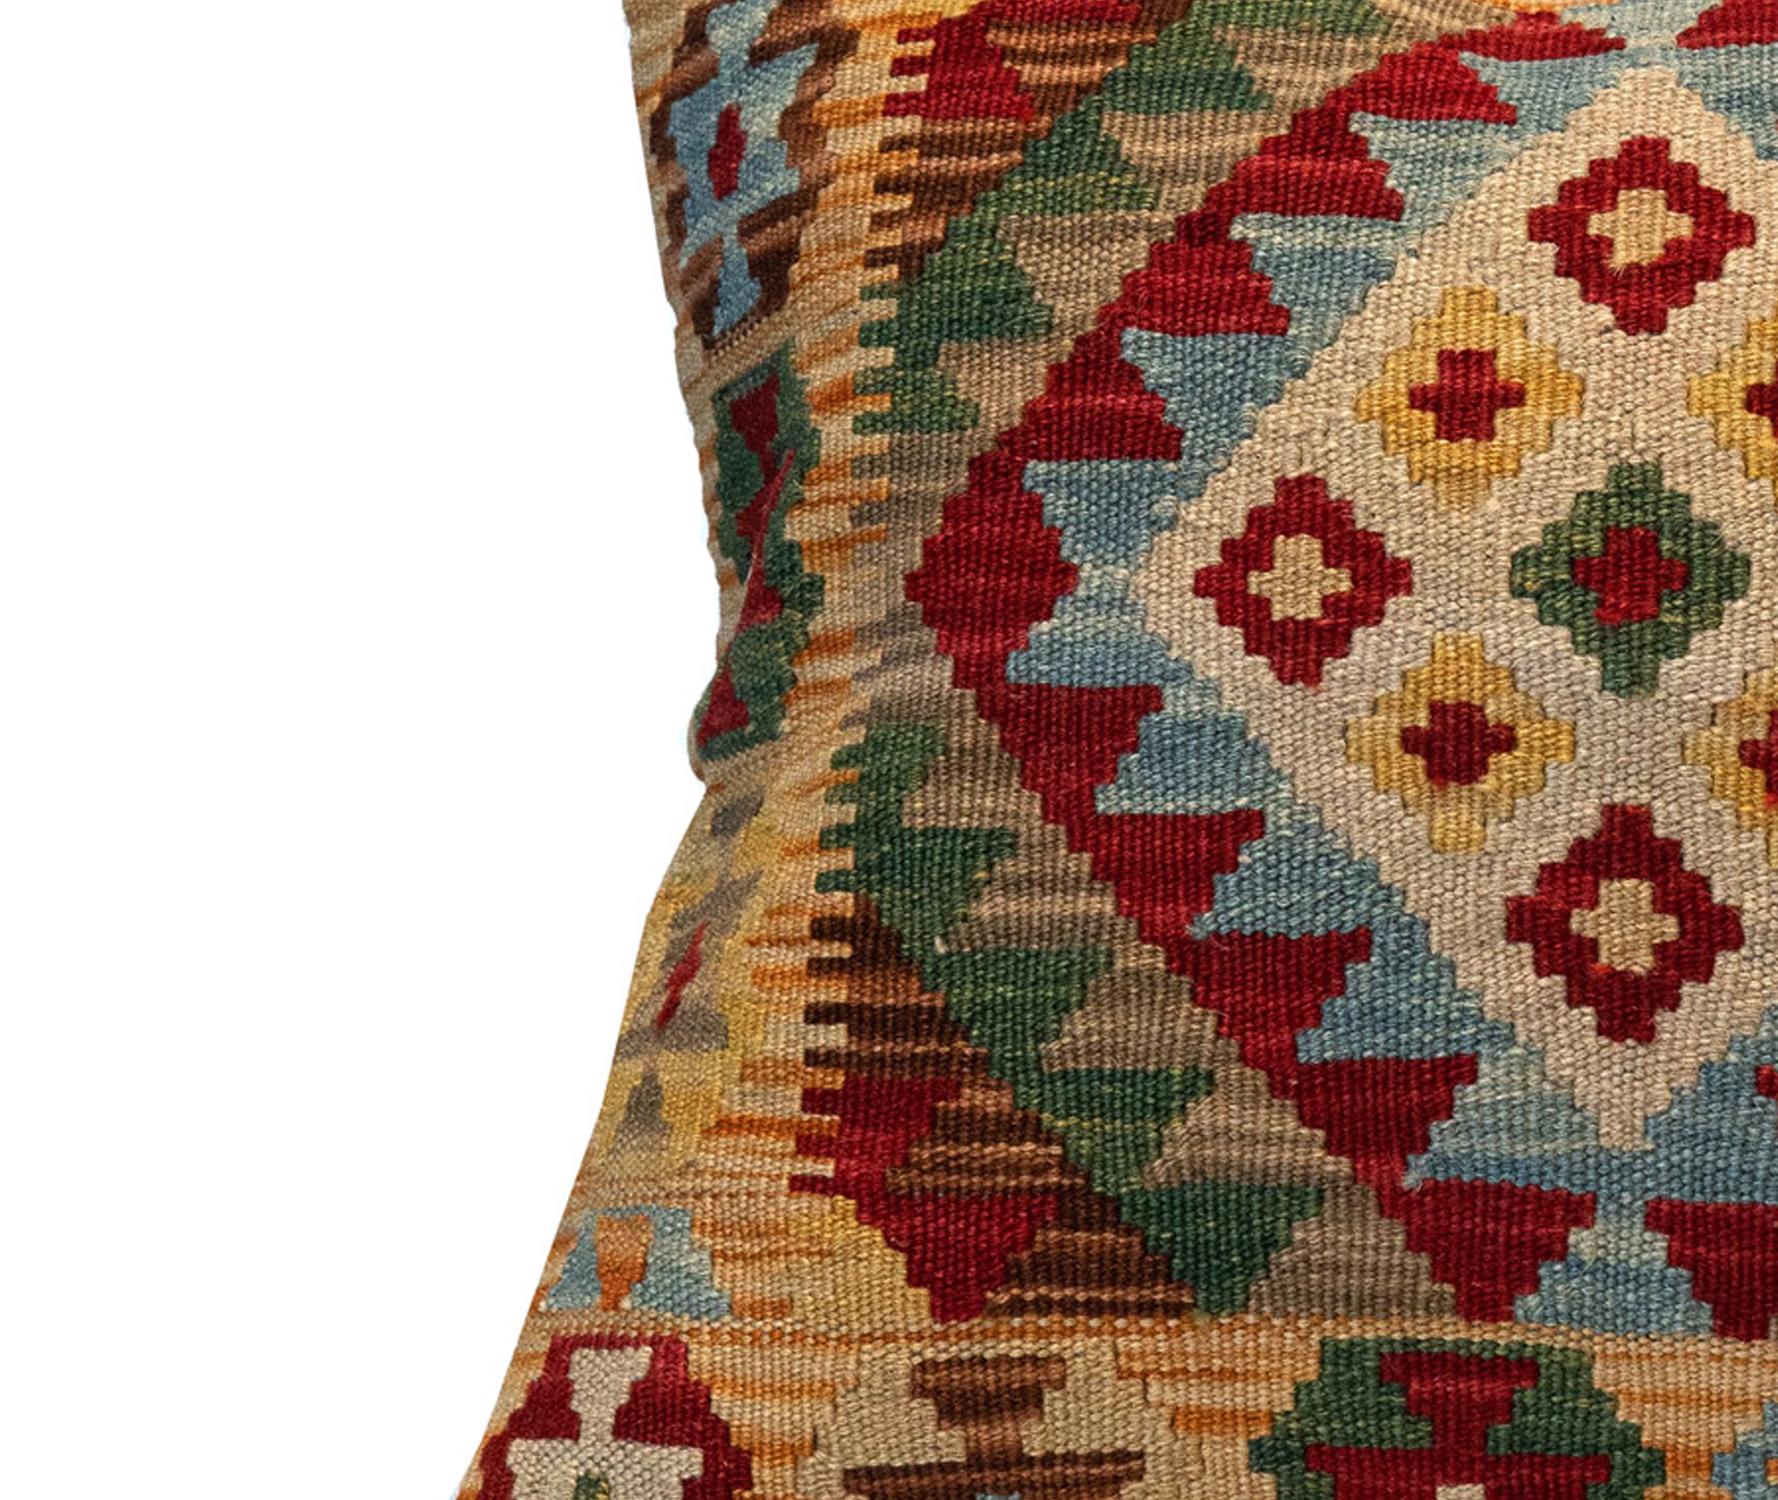 This fantastic cushion has been woven by hand using traditional kilim weaving techniques with hand-spun wool. Featuring a symmetrical geometric pattern woven in beautiful rustic colours. Including olive green, red, yellow and blue. These elegant